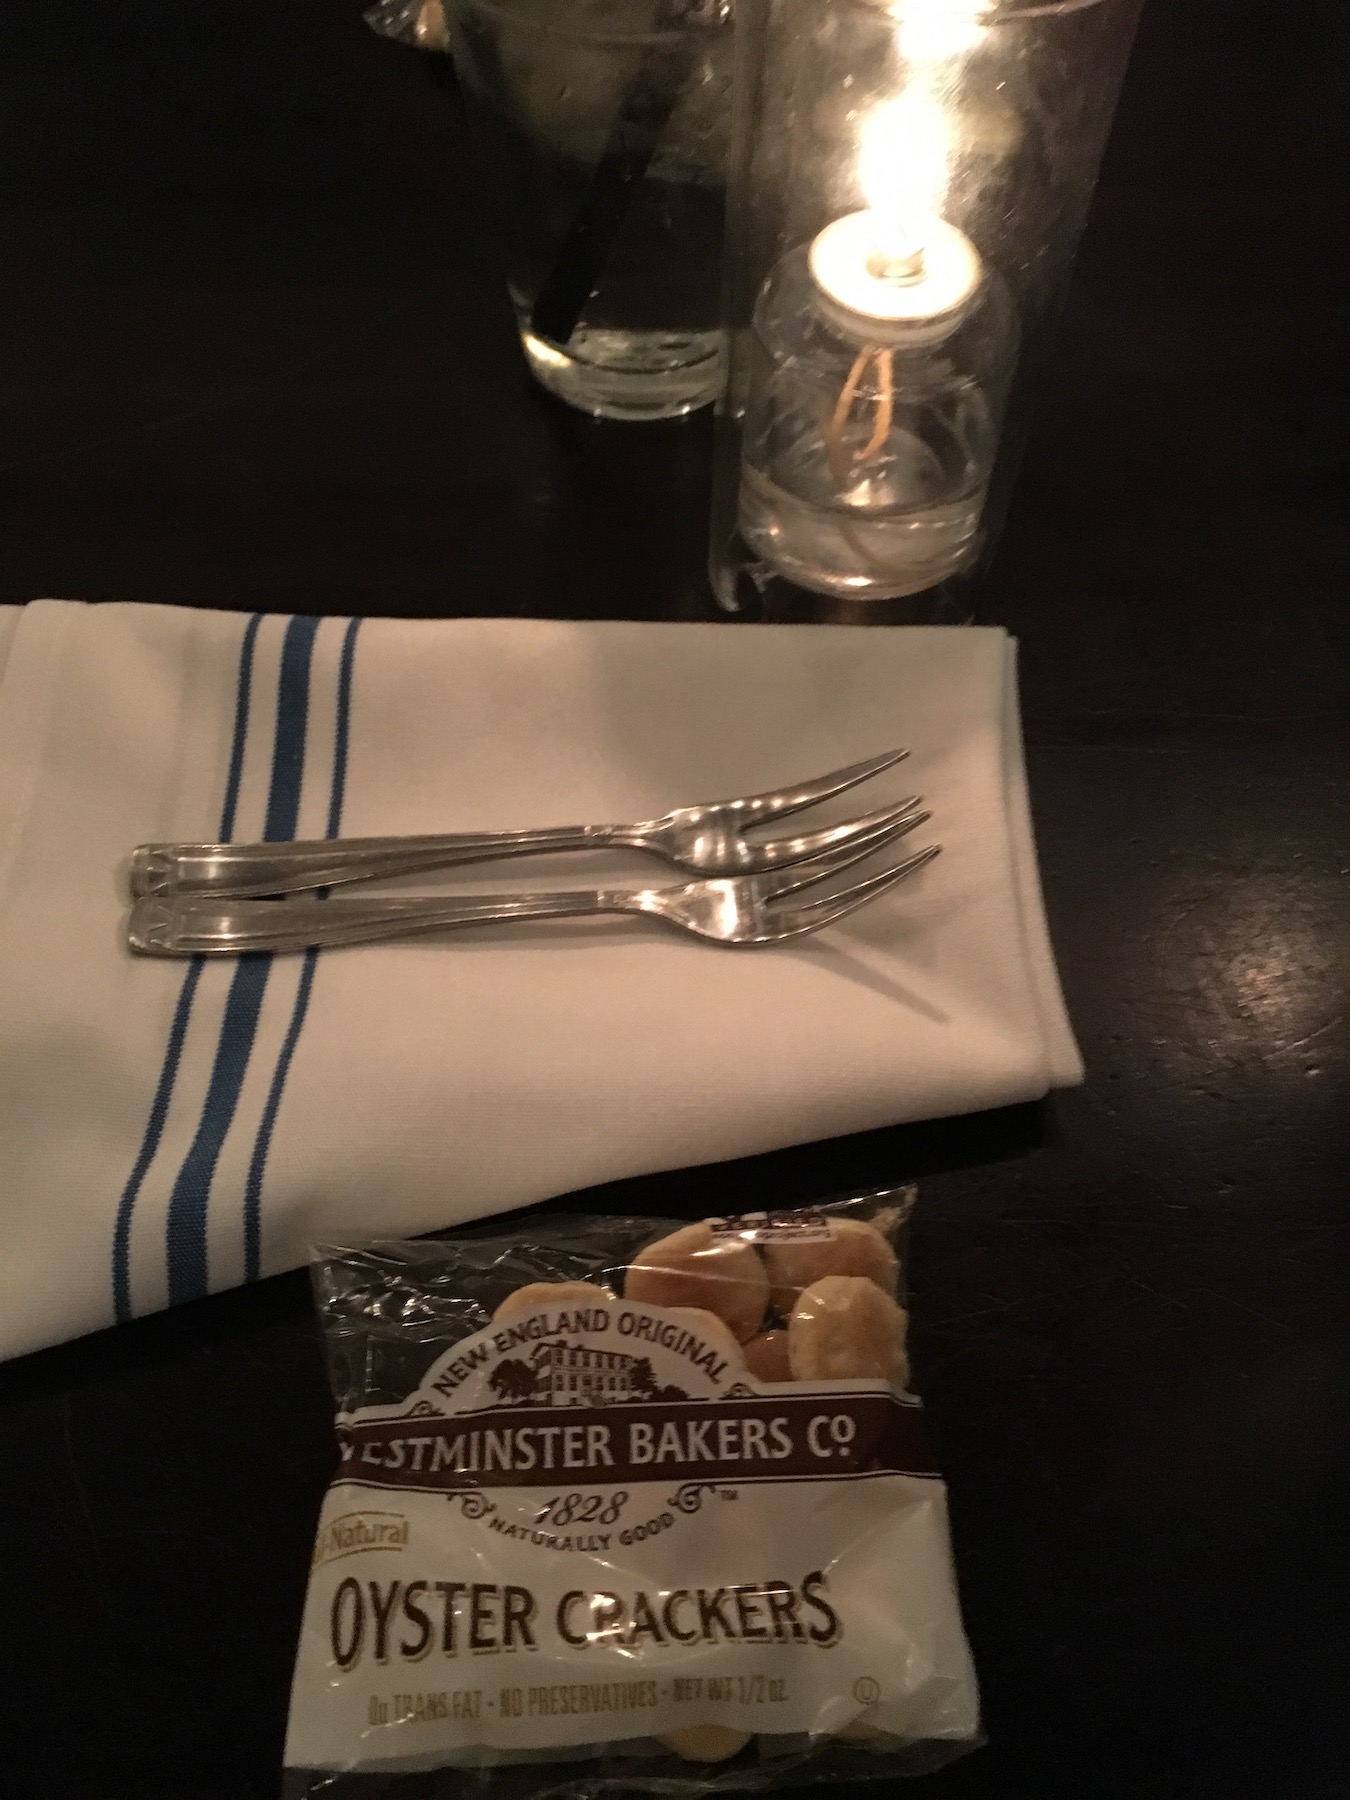 Galdstones Oyster Forks and Oyster Crackers